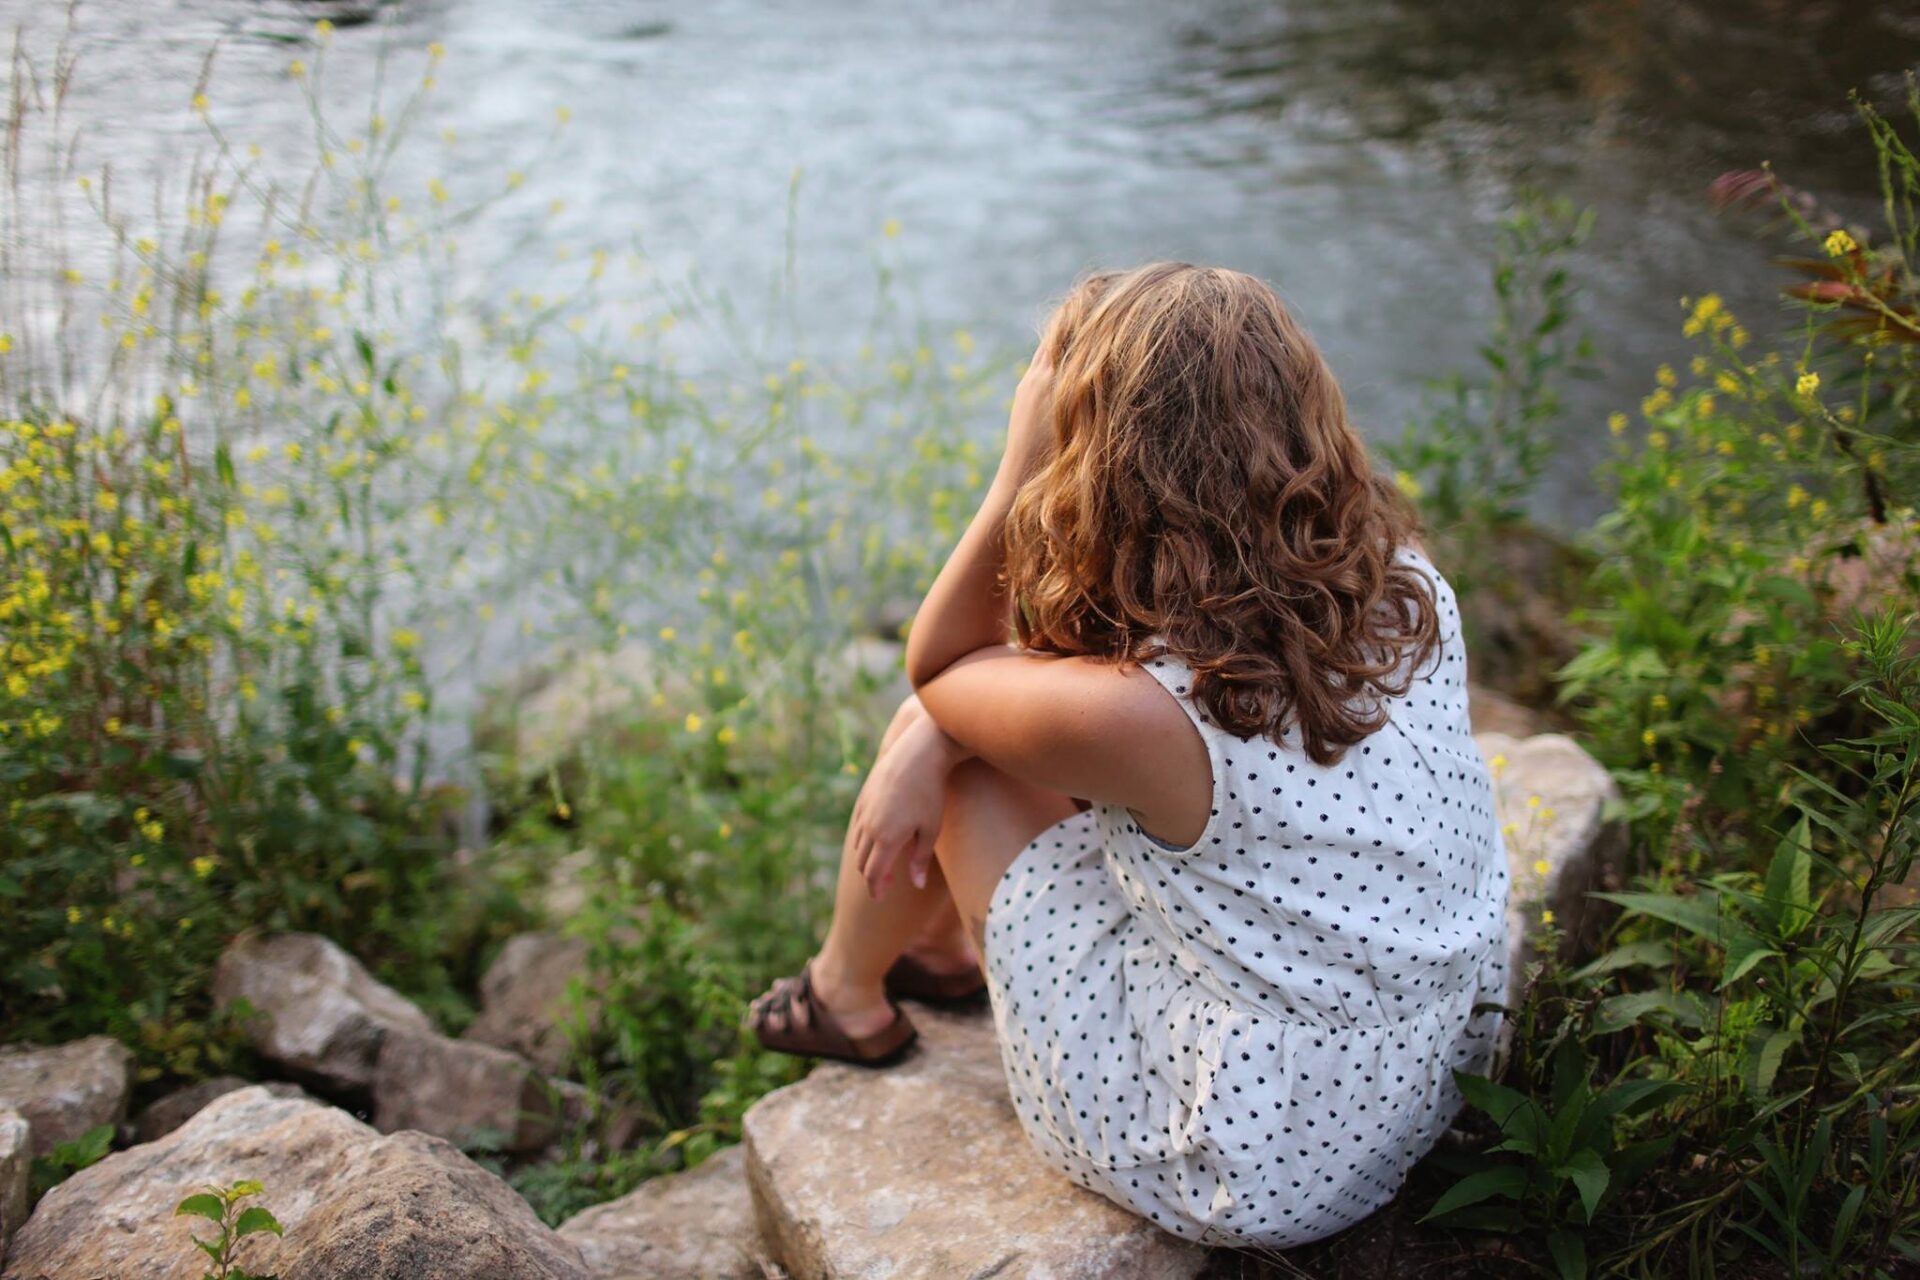 A girl sitting by the water coping with stress.